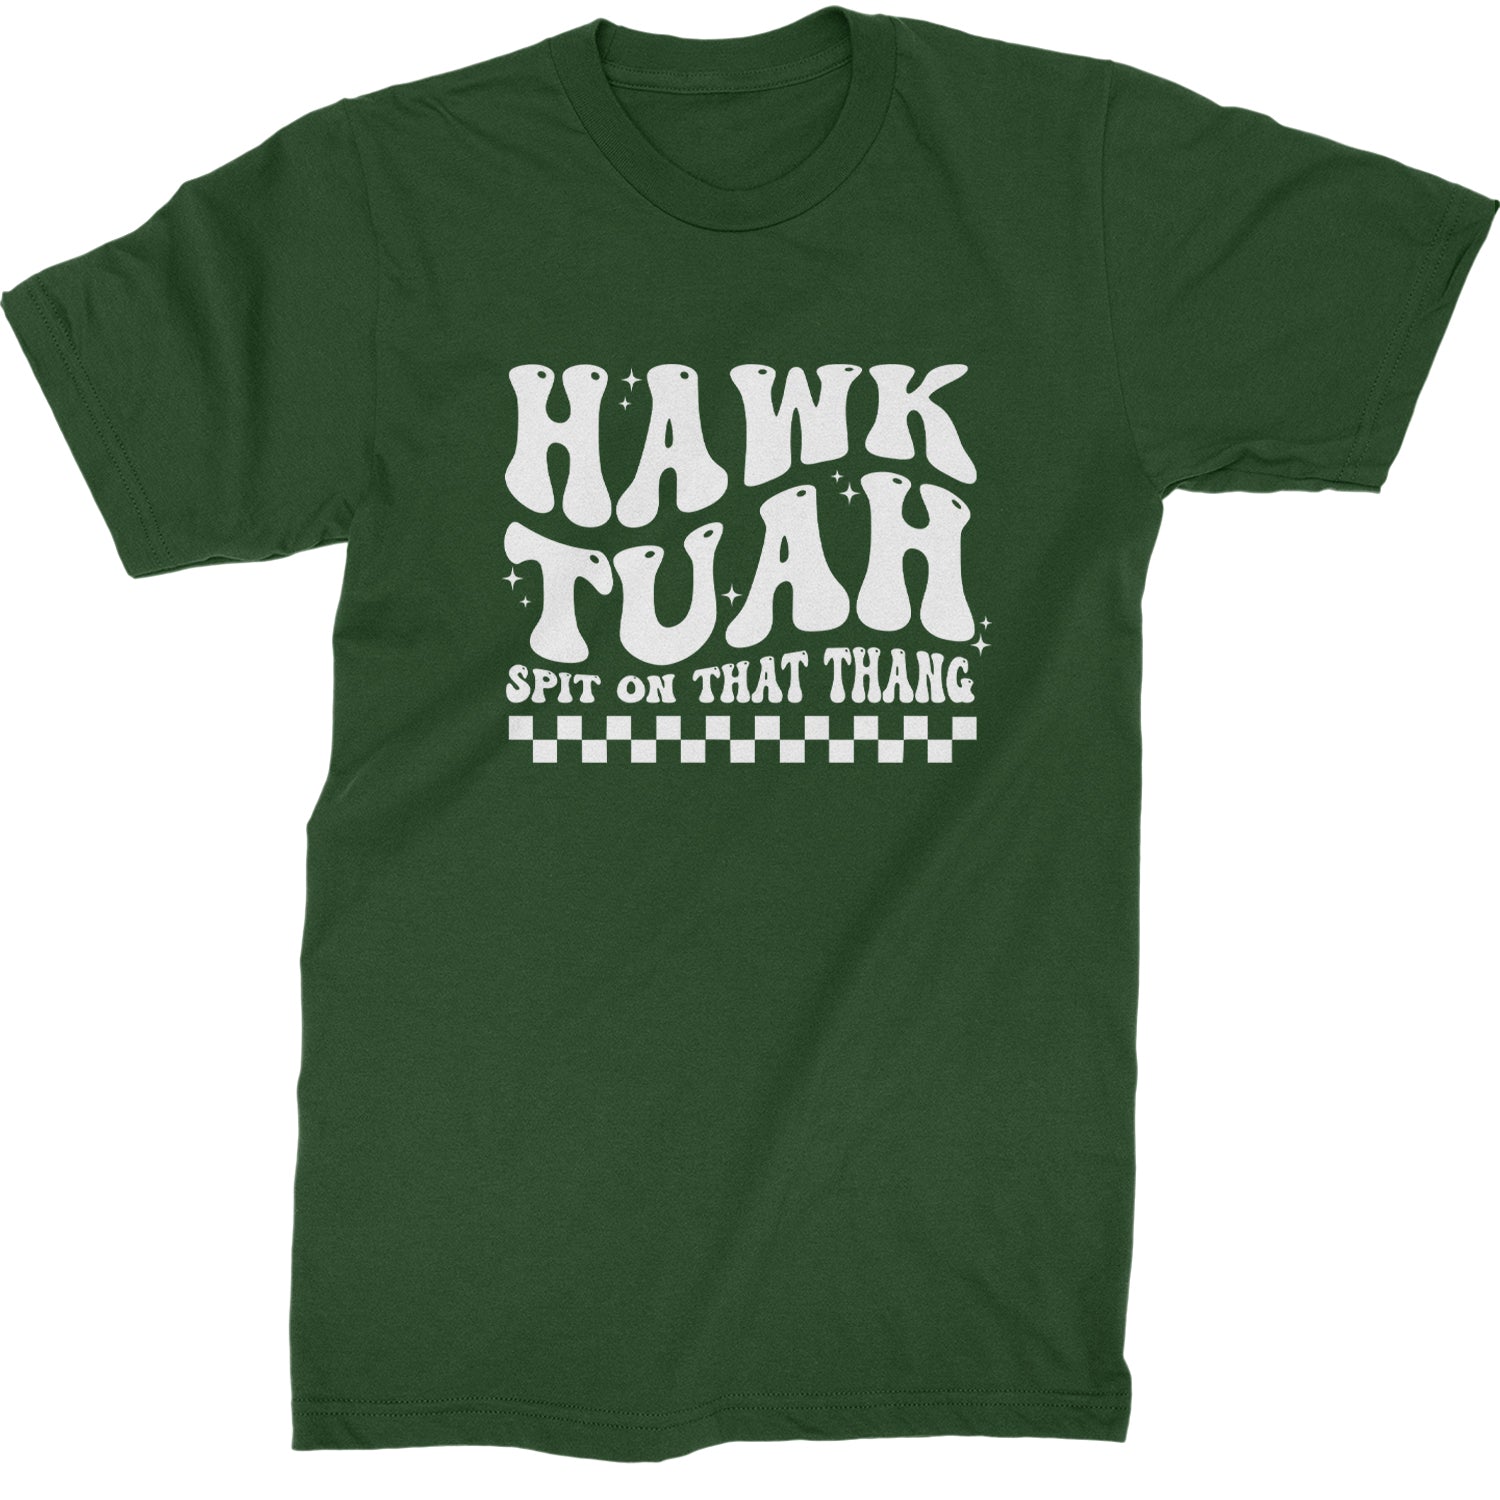 Hawk Tuah Spit On That Thang Mens T-shirt Forest Green